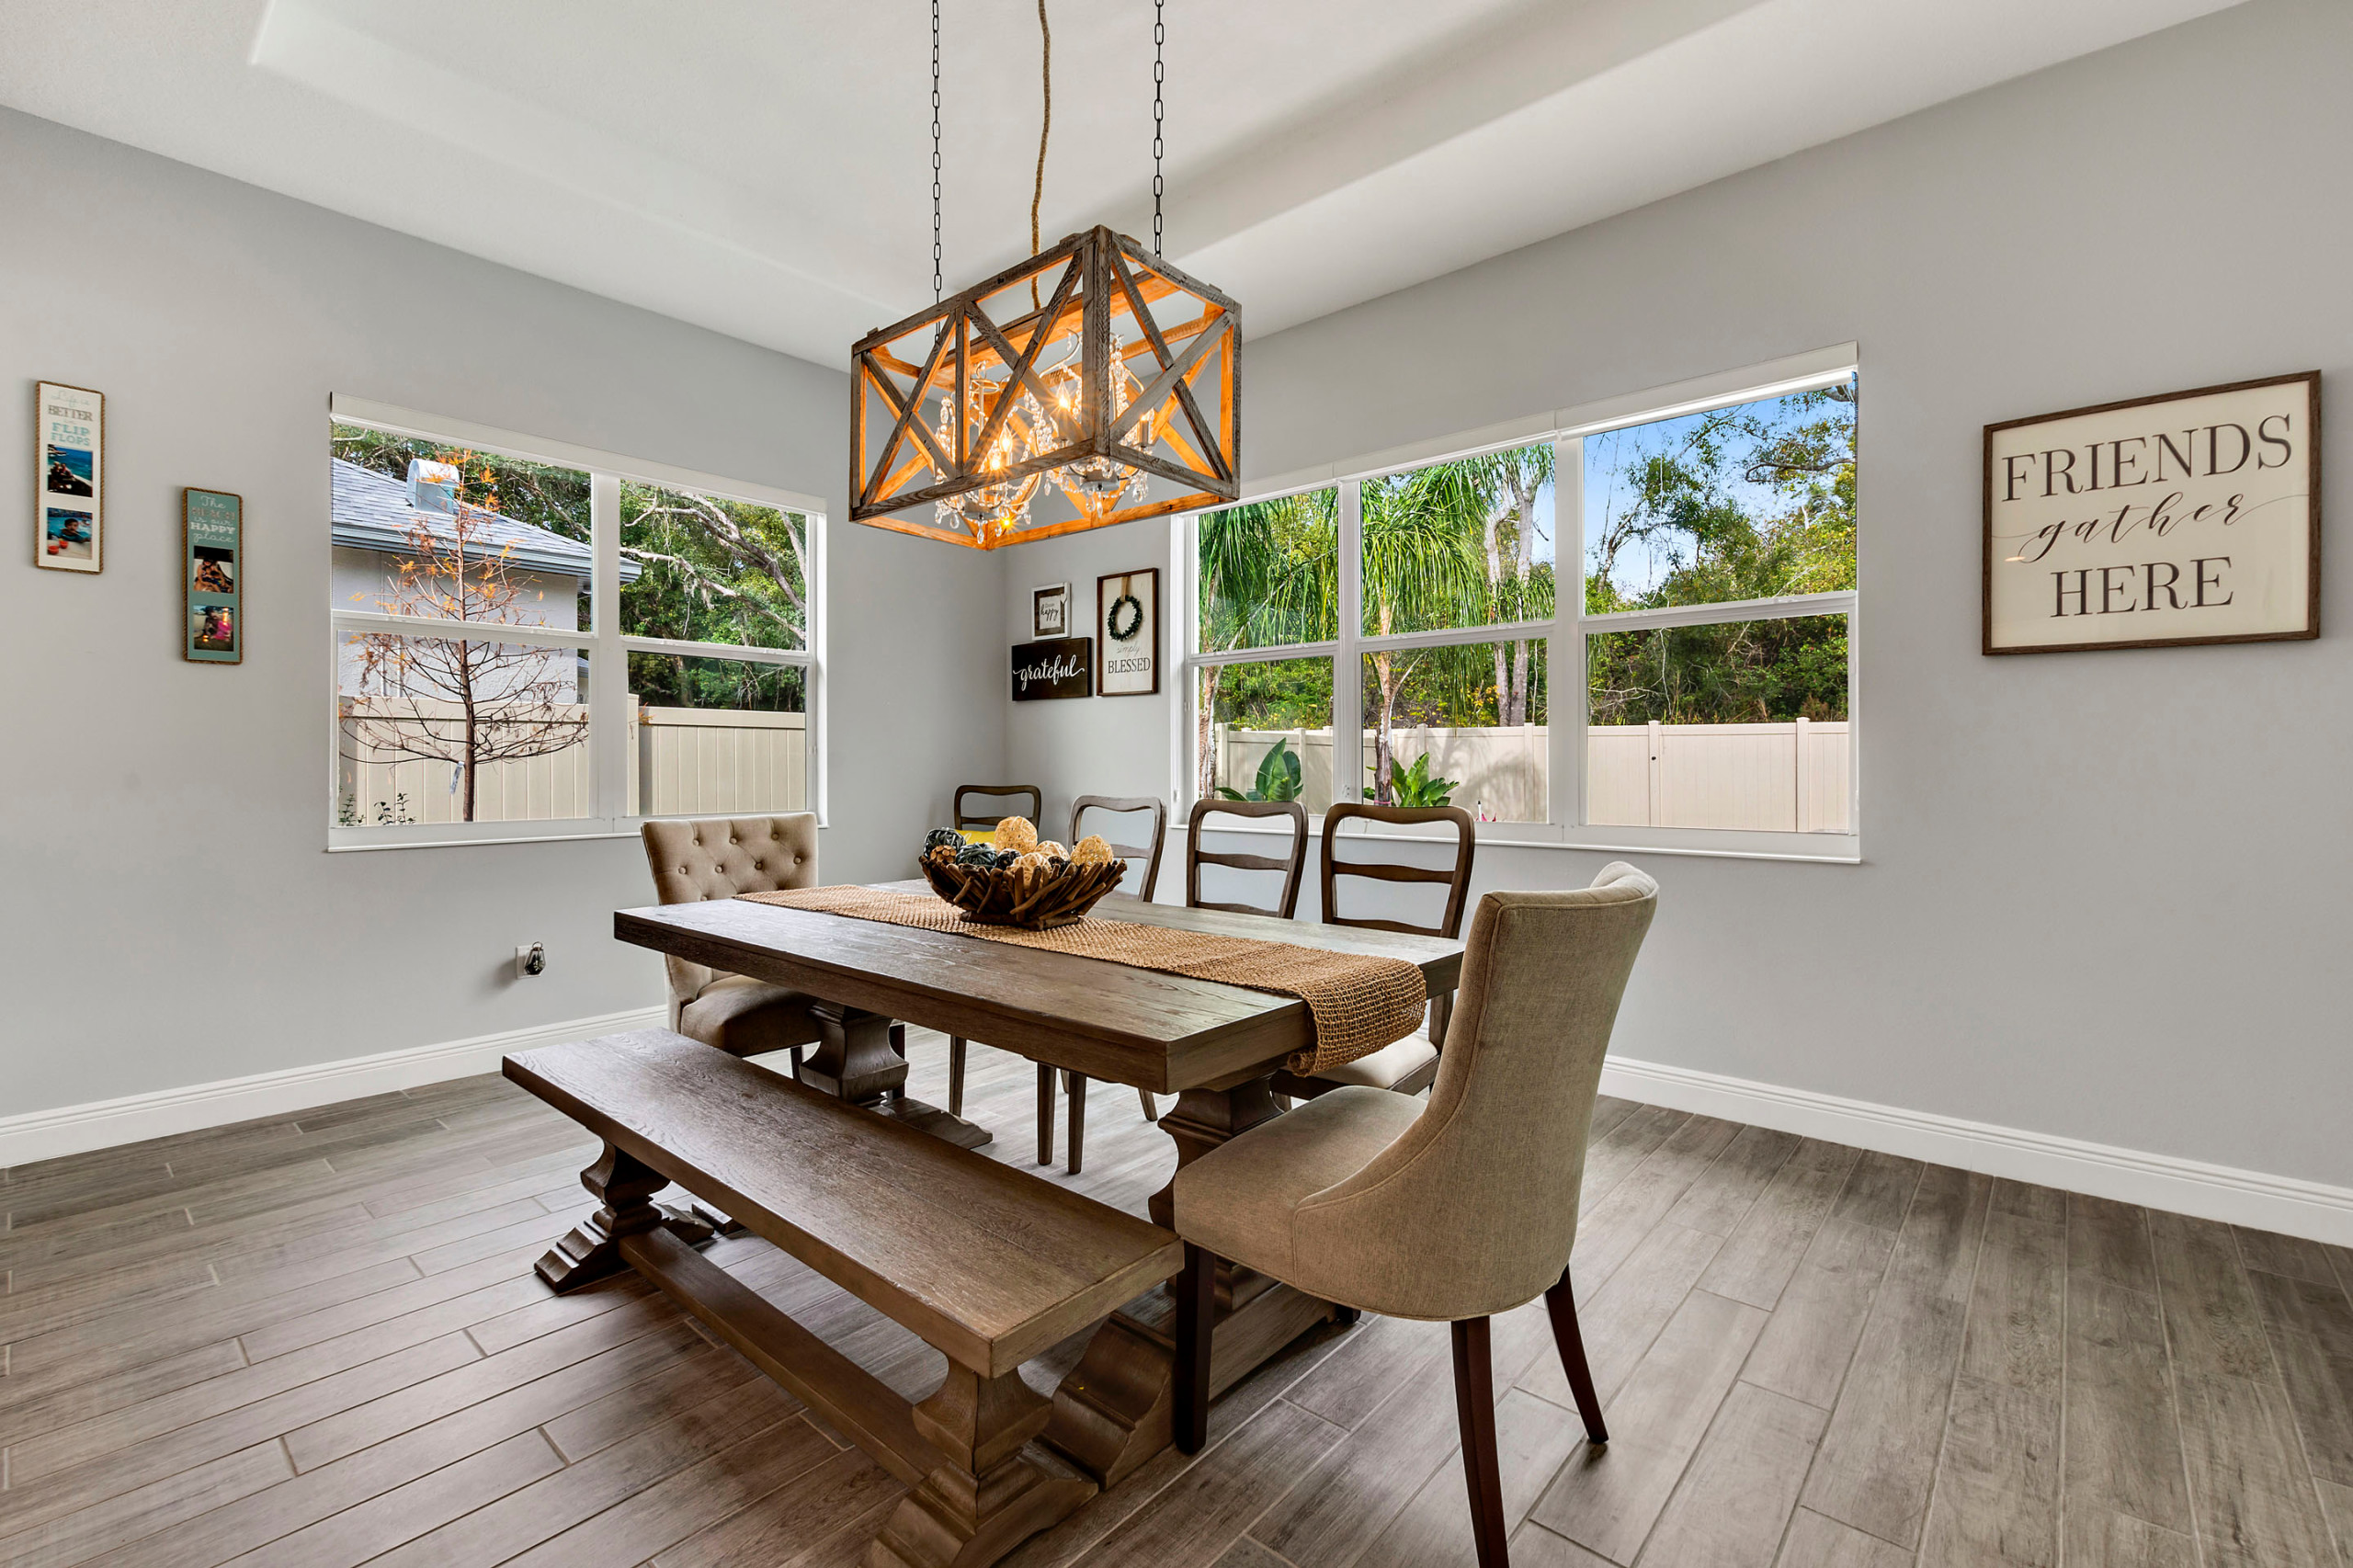 75 Beautiful Dining Room With Gray Walls Pictures Ideas January 2022 Houzz - How To Decorate A Dining Room With Grey Walls